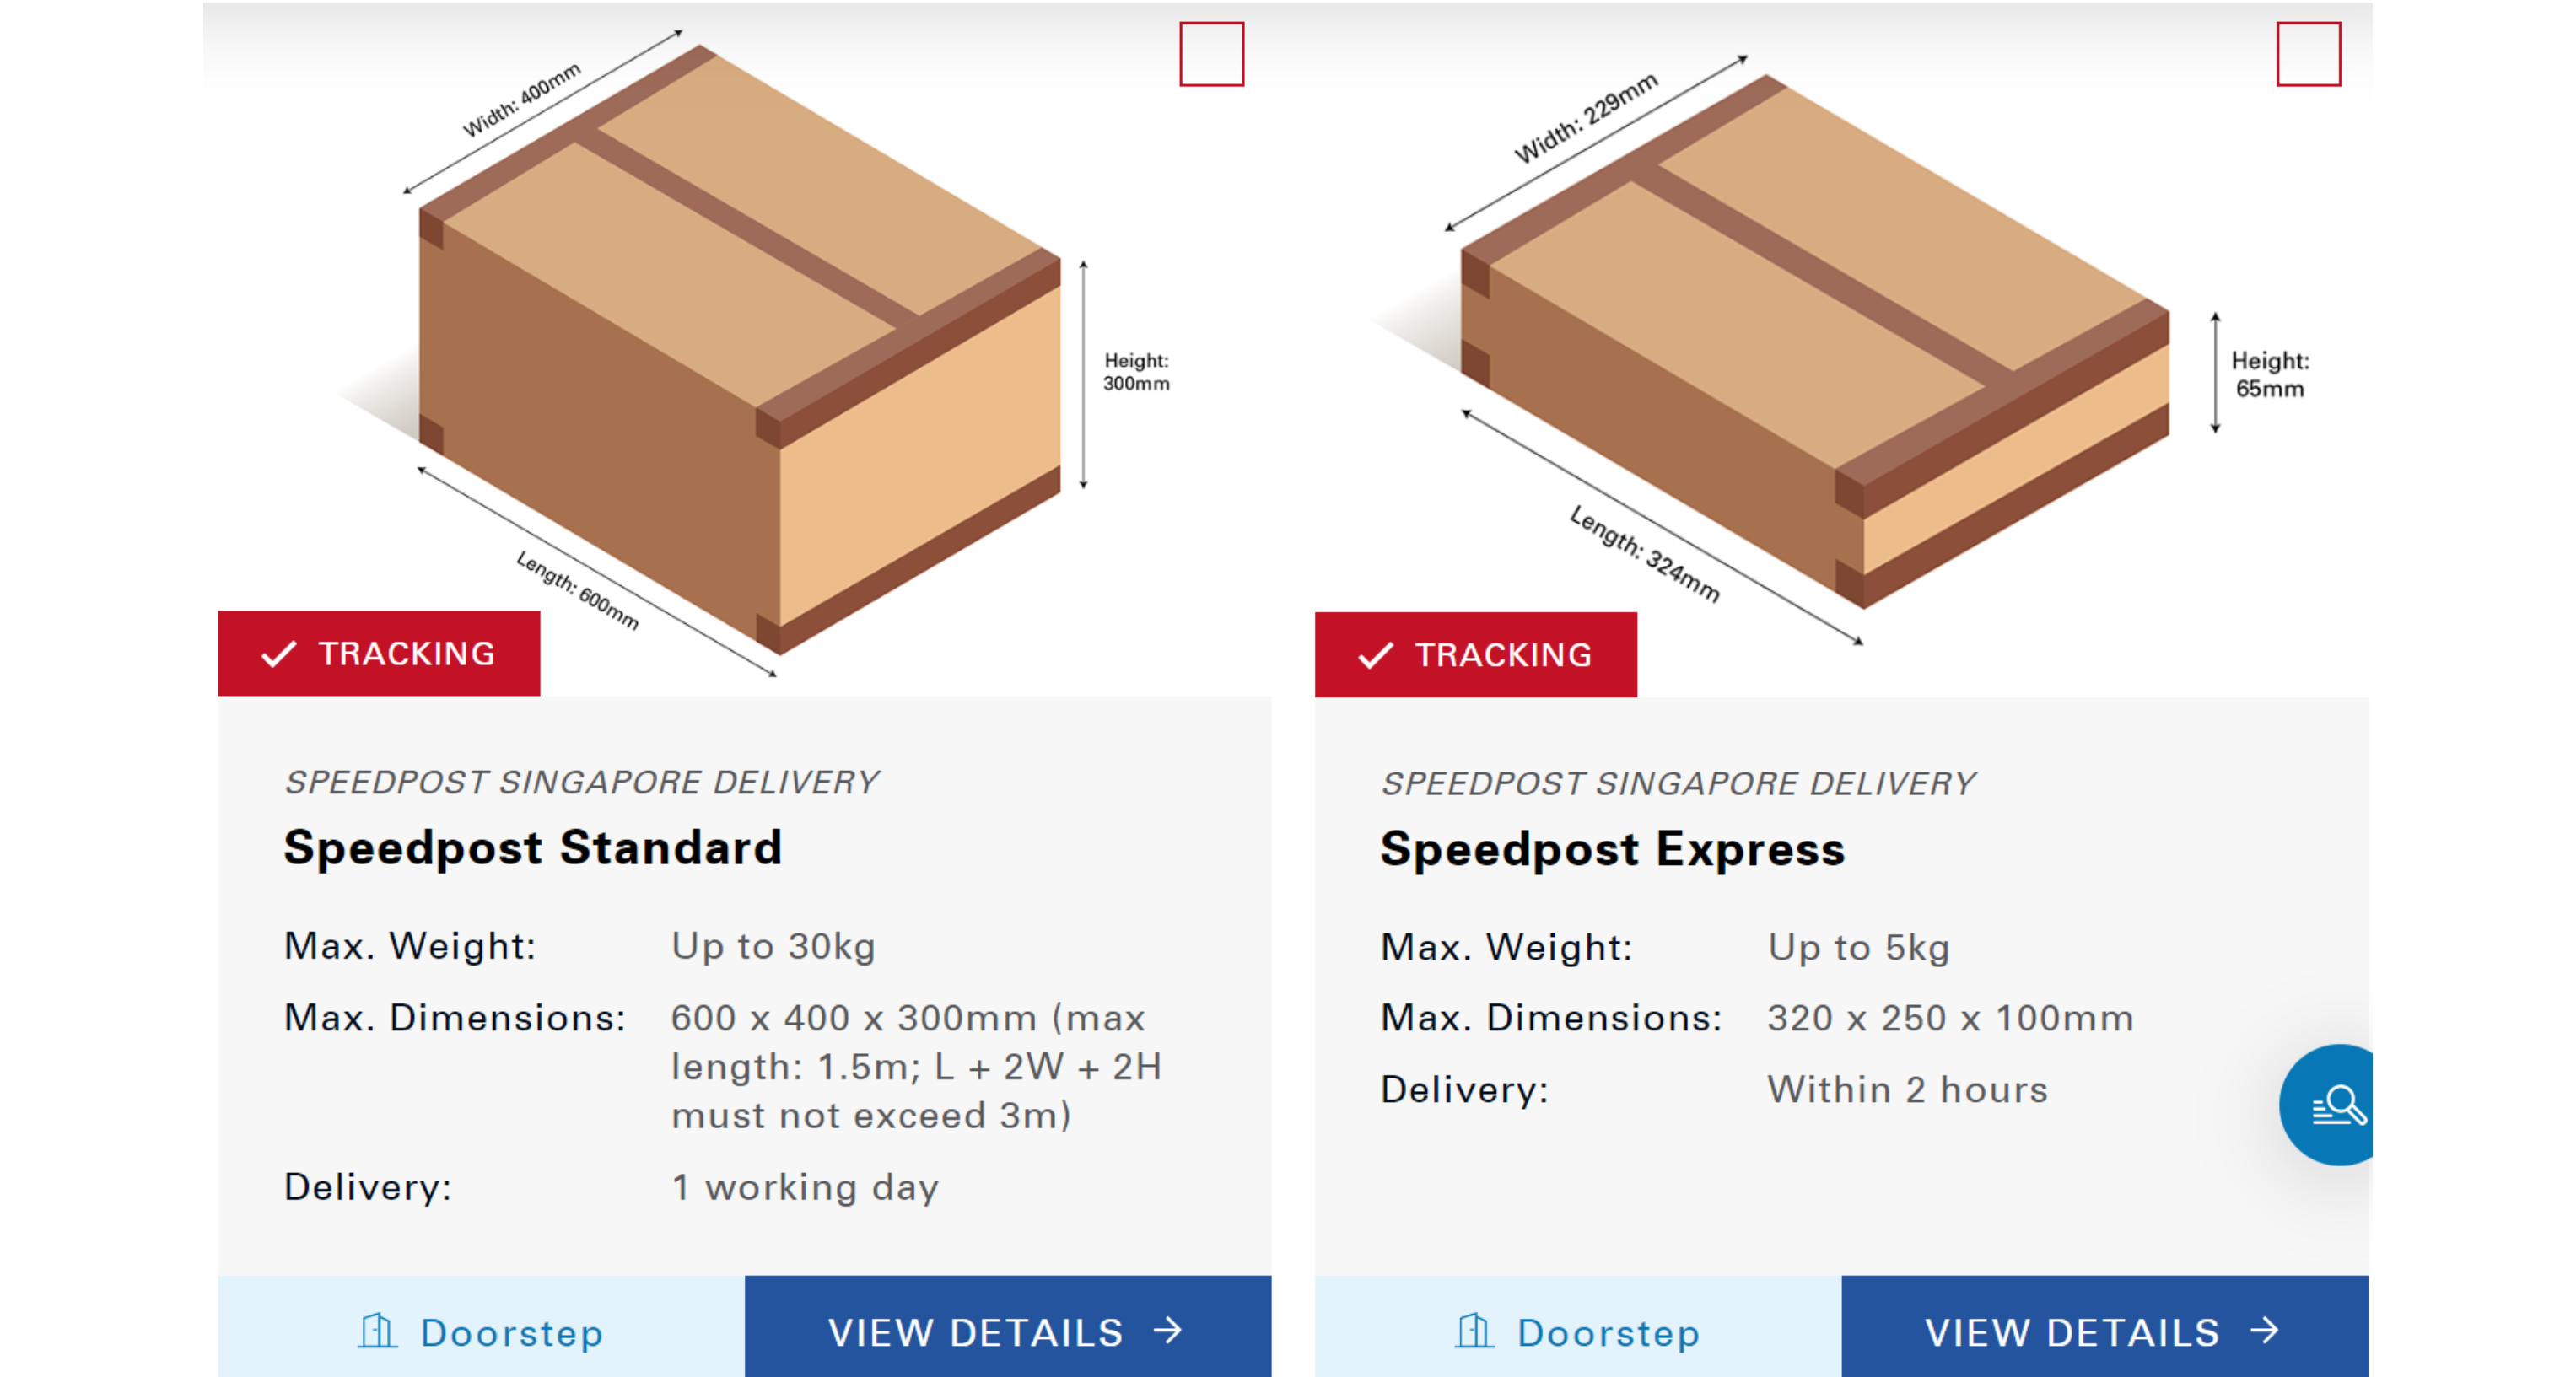 SingPost speedpost service's delivery time